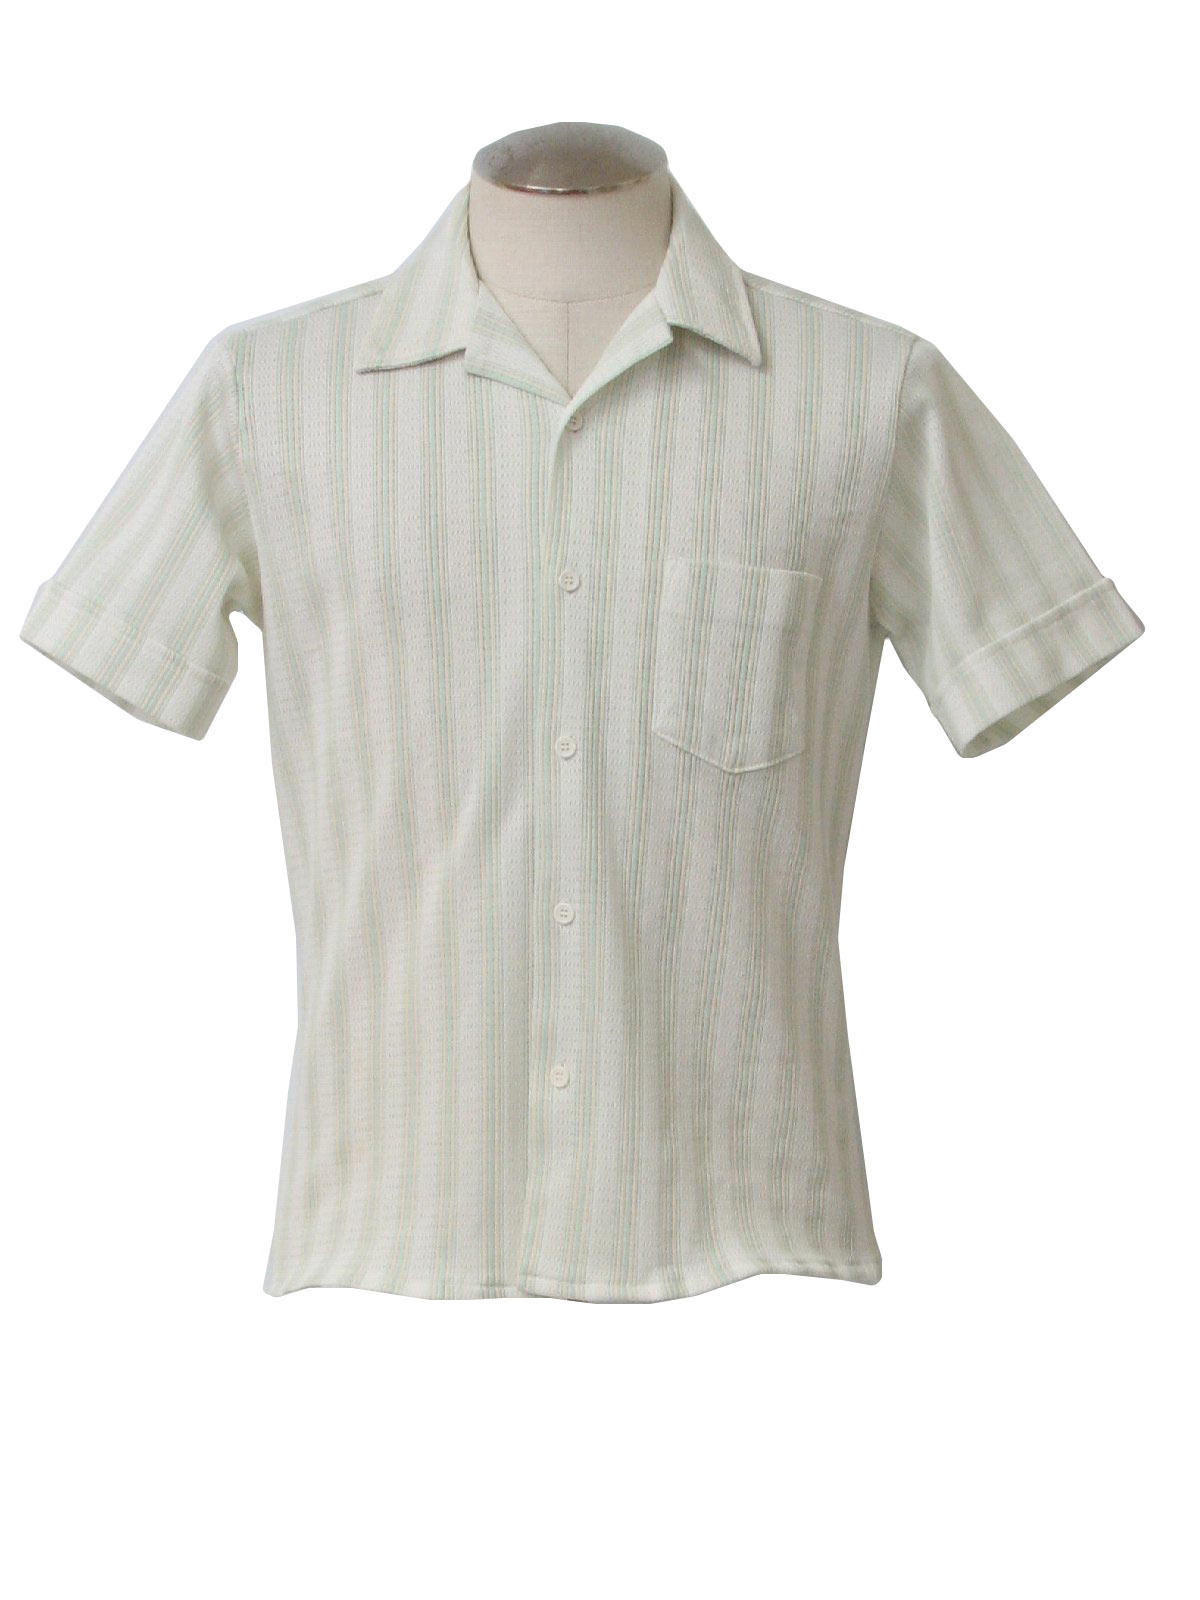 Sears Seventies Vintage Shirt: 70s -Sears- Mens white, cream and pastel ...